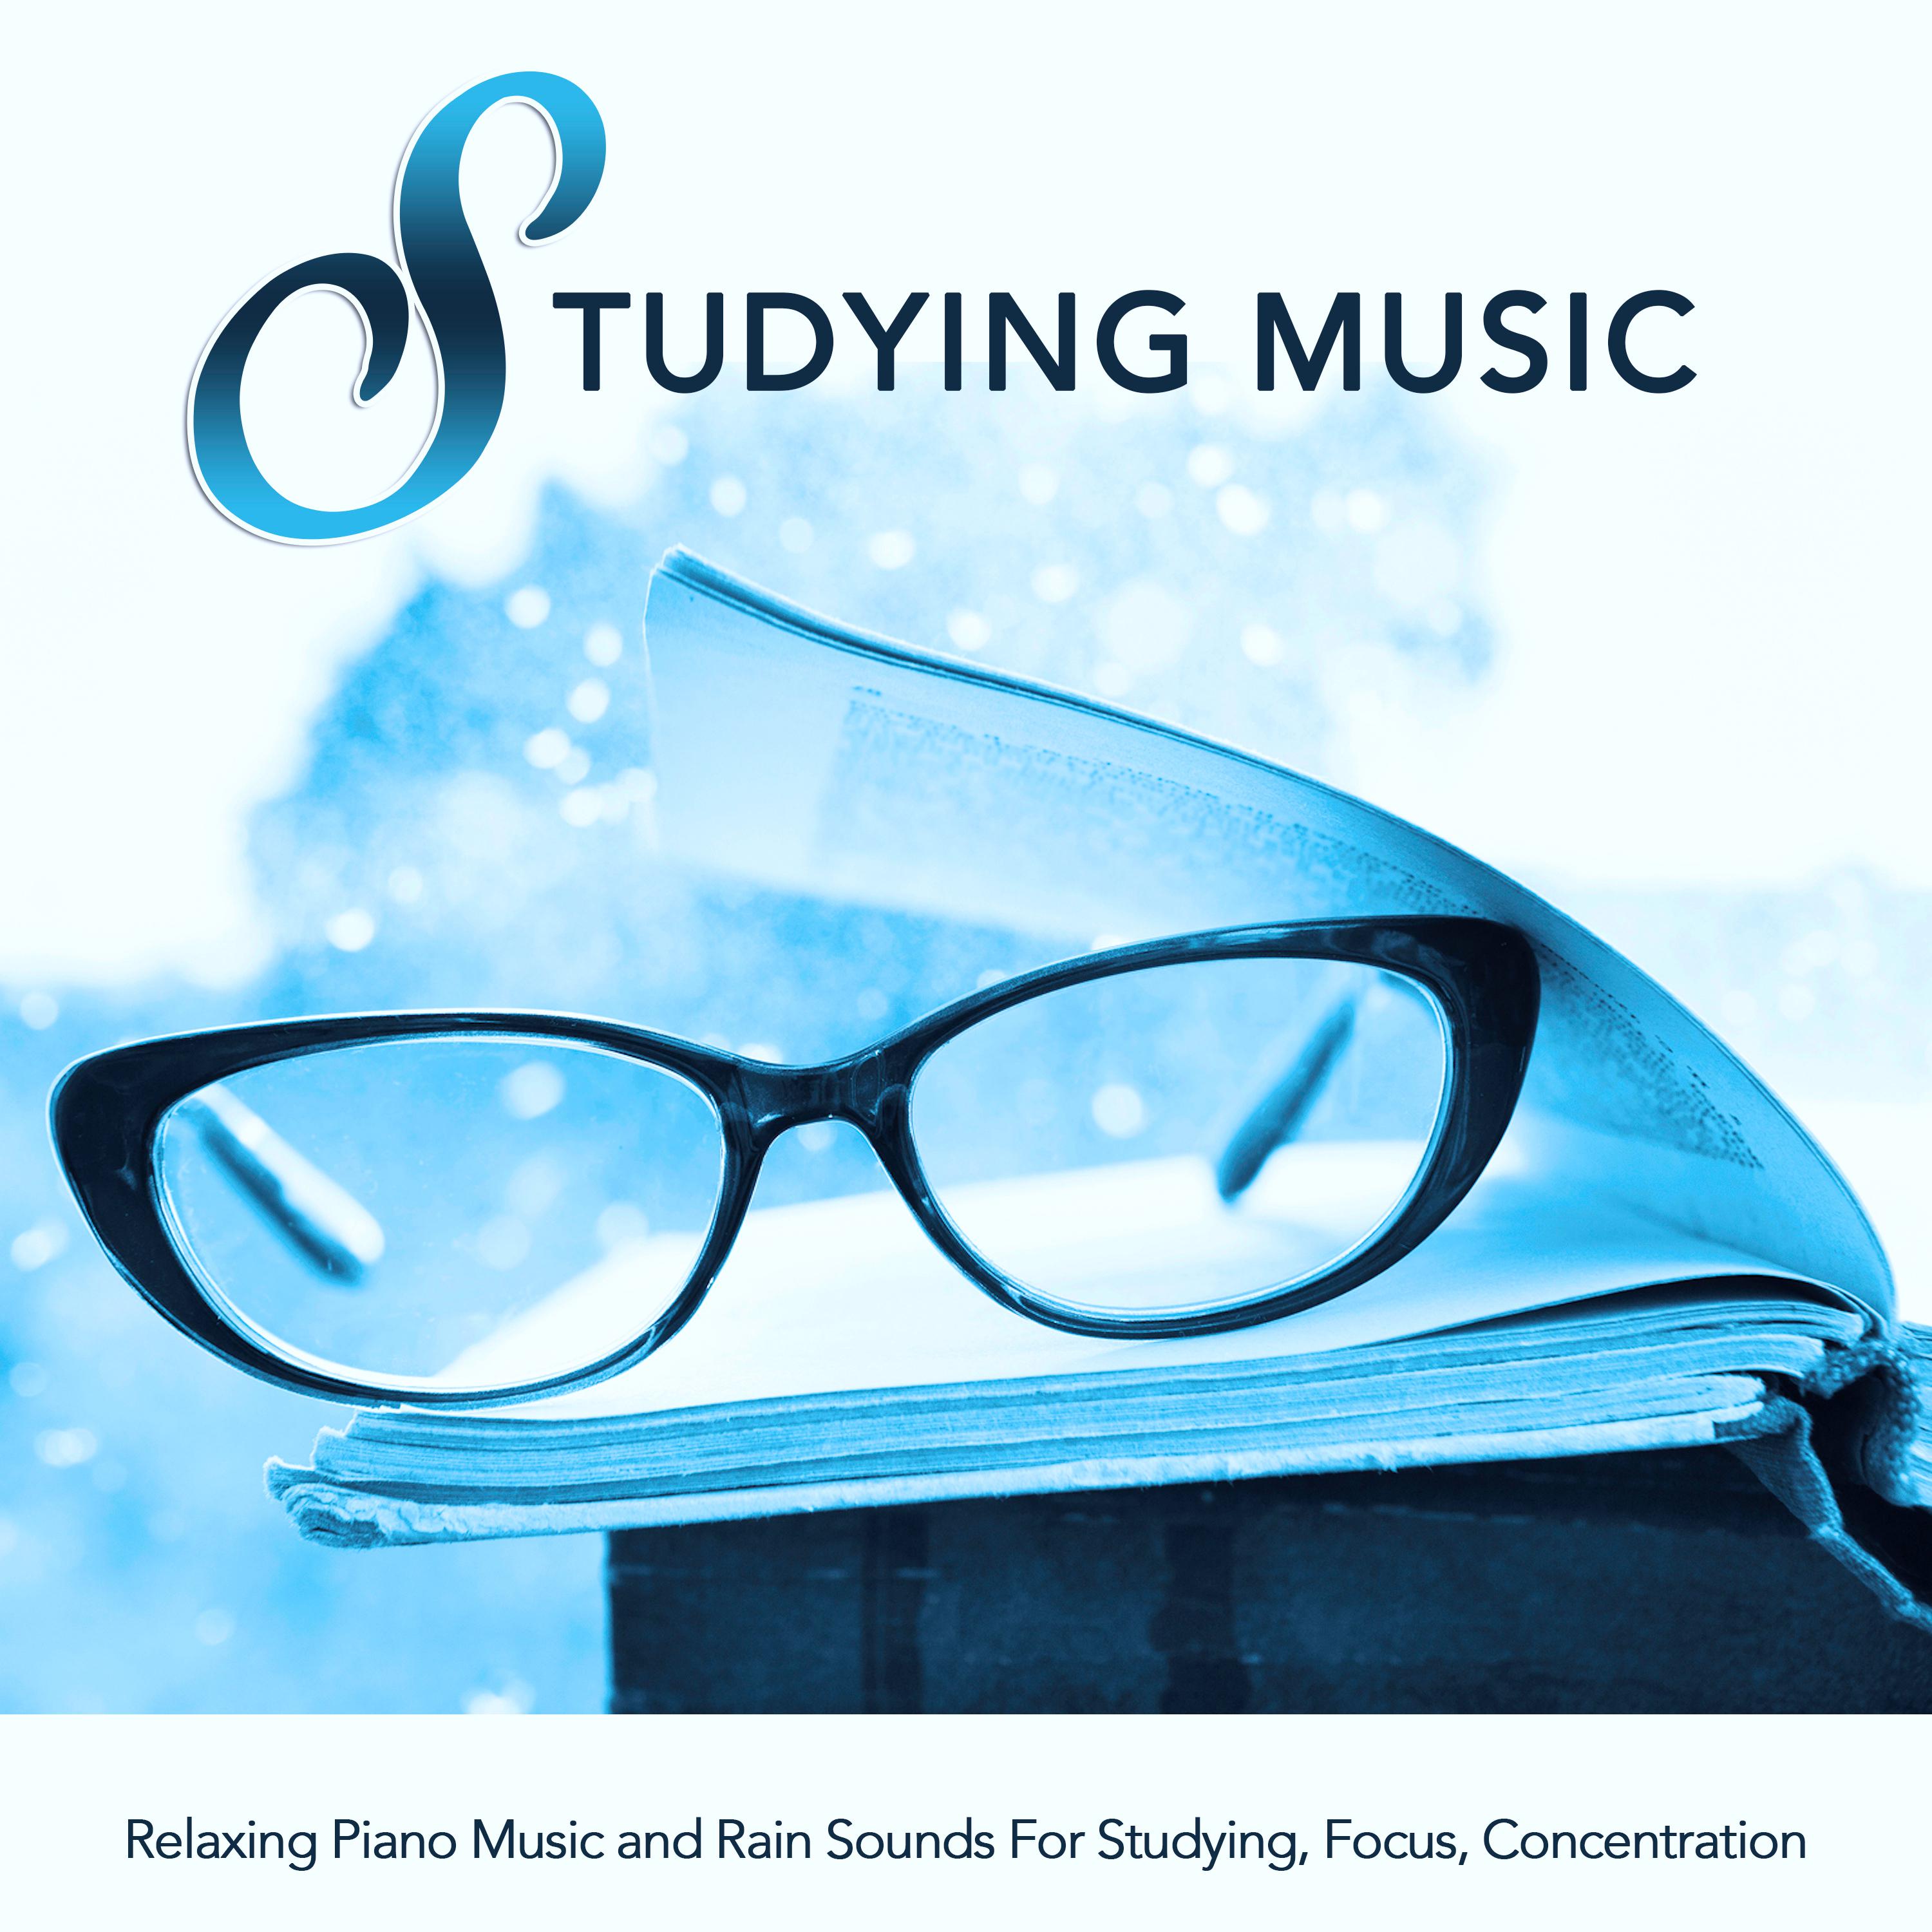 Focus and Concentration Music to Study By